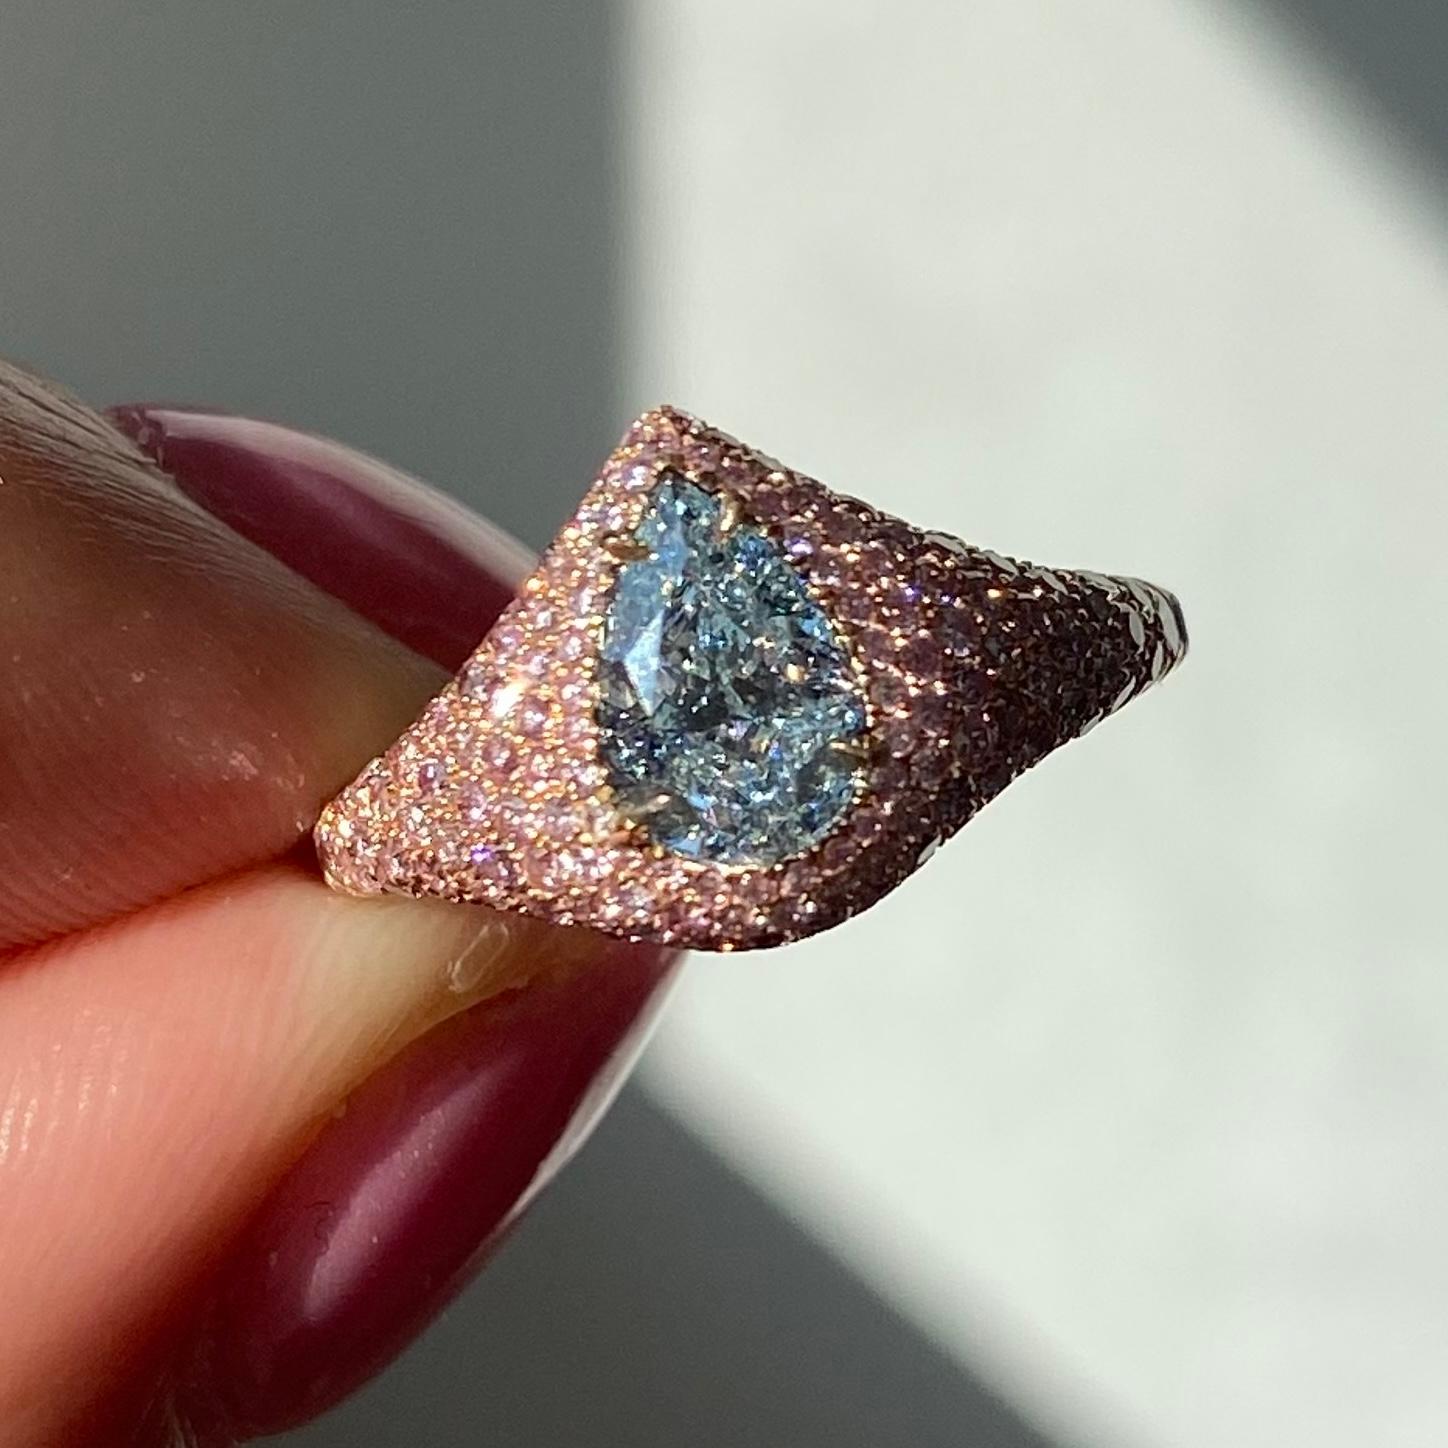 Elegant and beautiful ring with some of the earths rarest specimens- natural blue and pink diamonds

Center stone is a 1ct GIA Light Blue Pear shape with no bow tie, full of life
Rose Gold ring with natural fancy pink round diamonds
This piece can